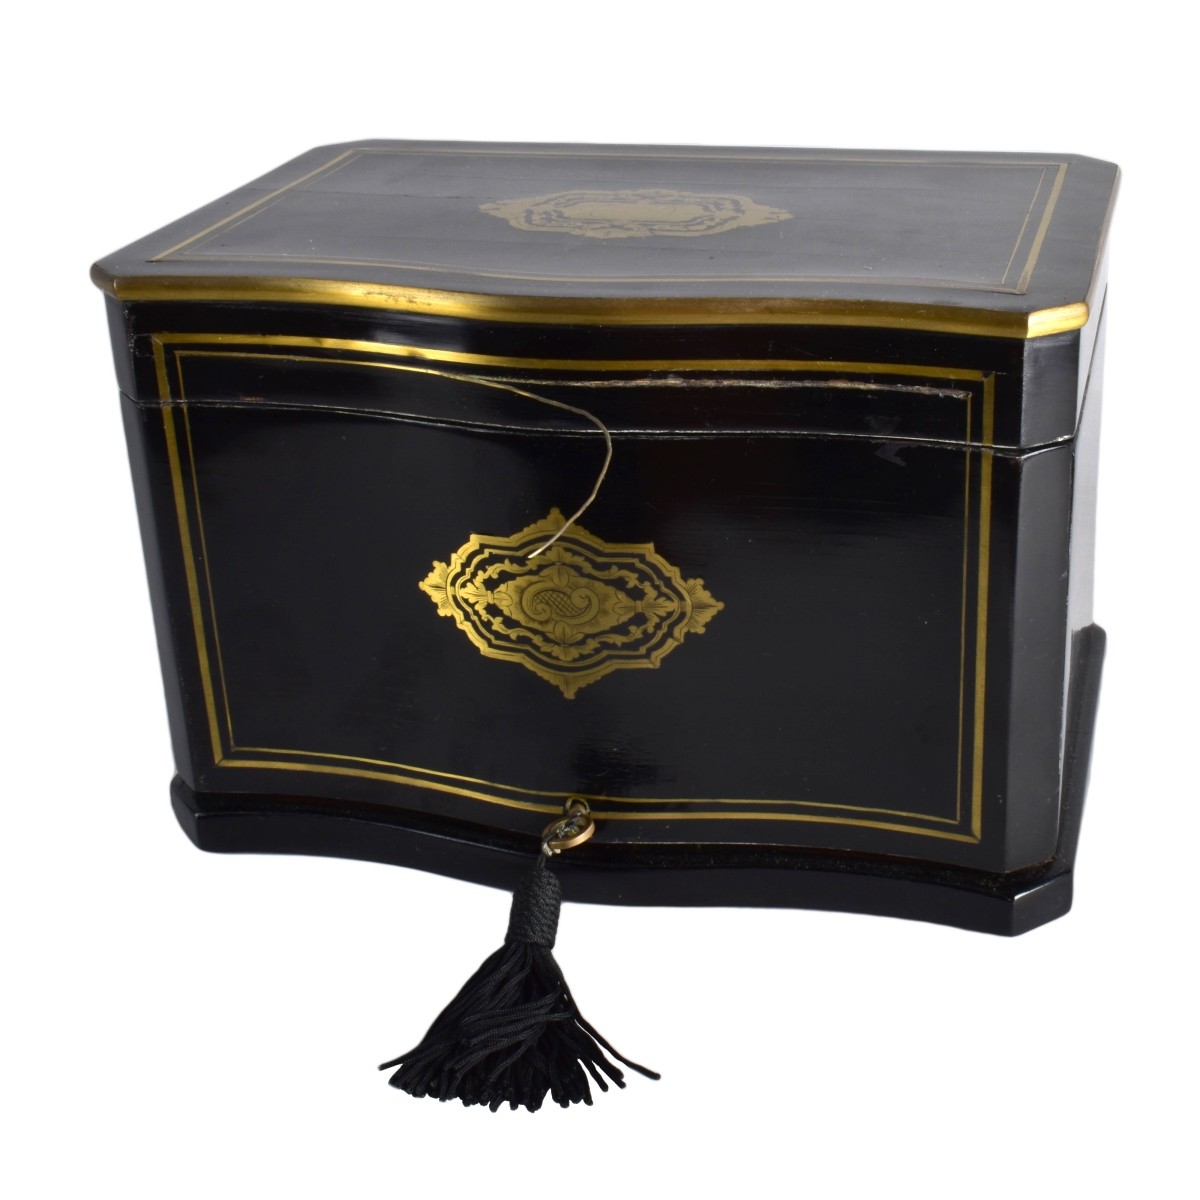 Antique English Lacquered Humidor